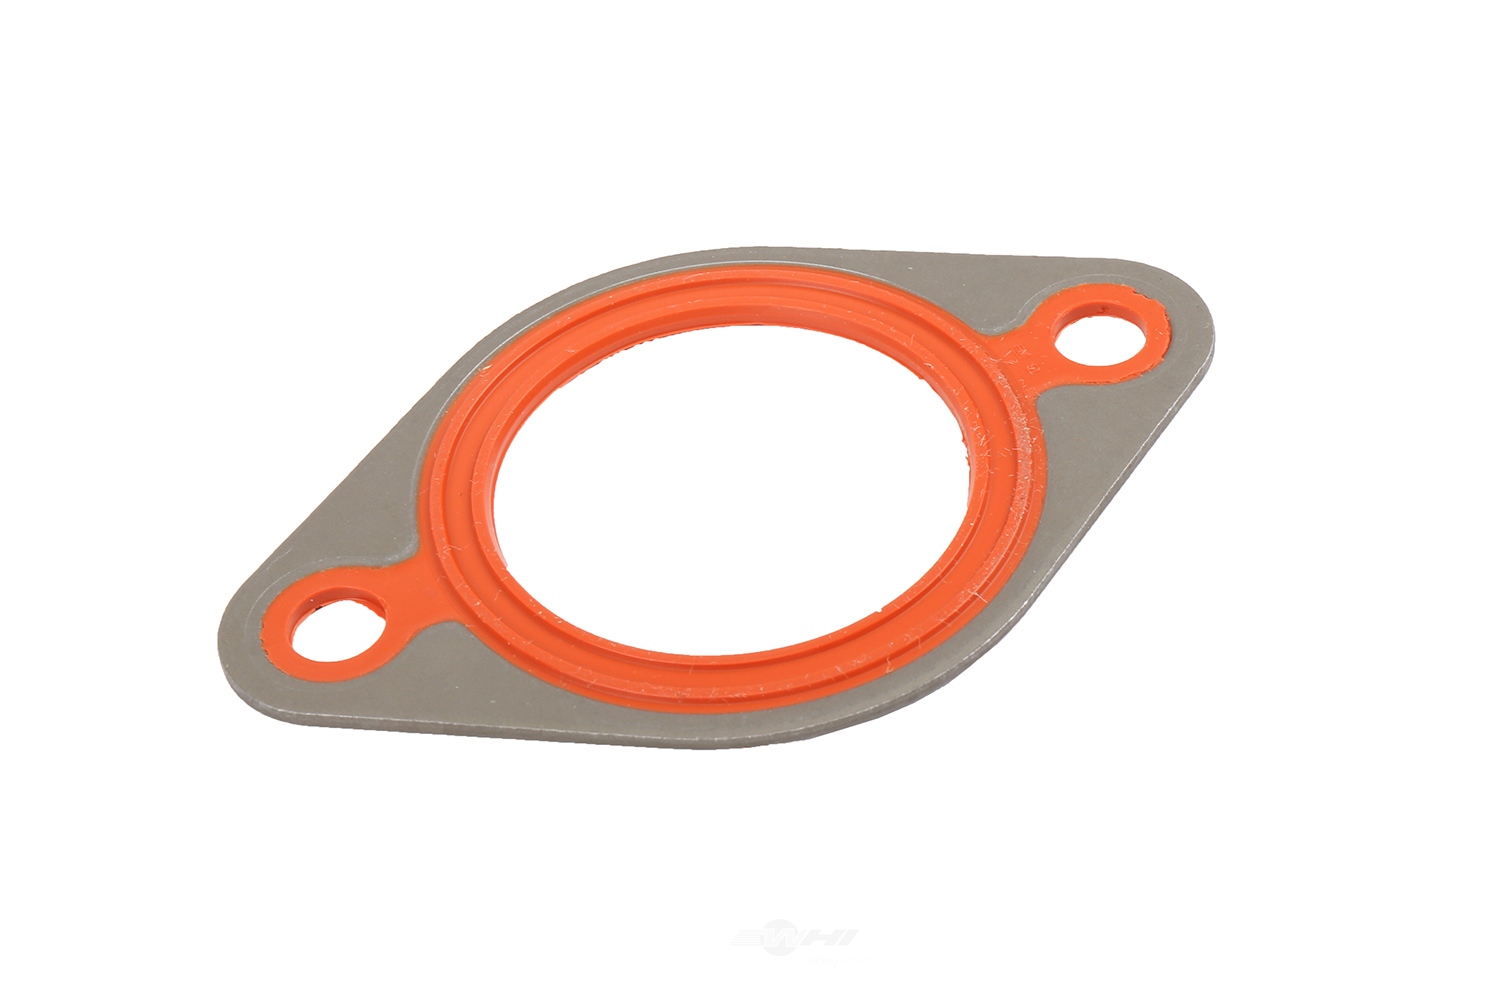 GM GENUINE PARTS - Engine Coolant Crossover Pipe Gasket - GMP 12571593